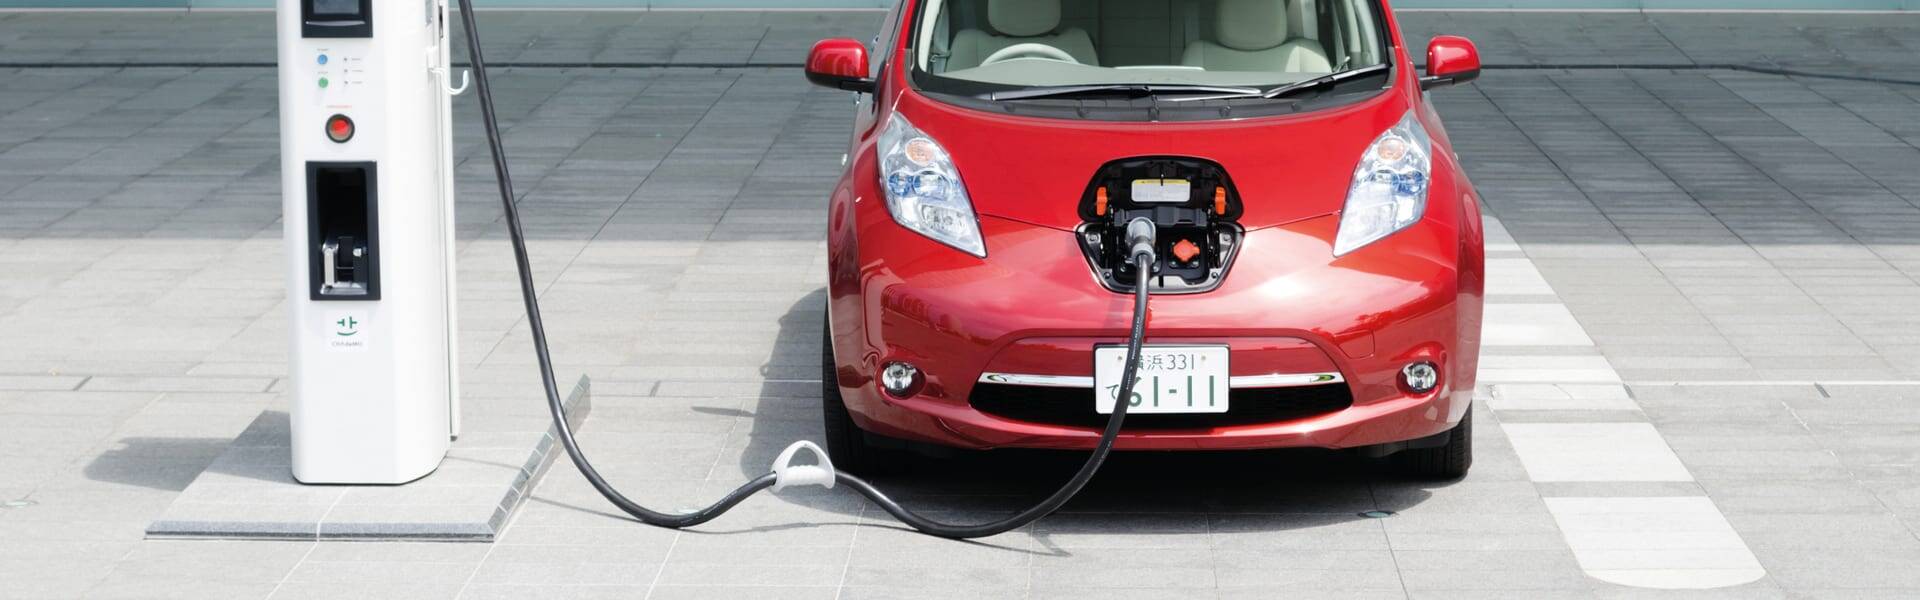 Surge in EV charging points across UKPN’s patch